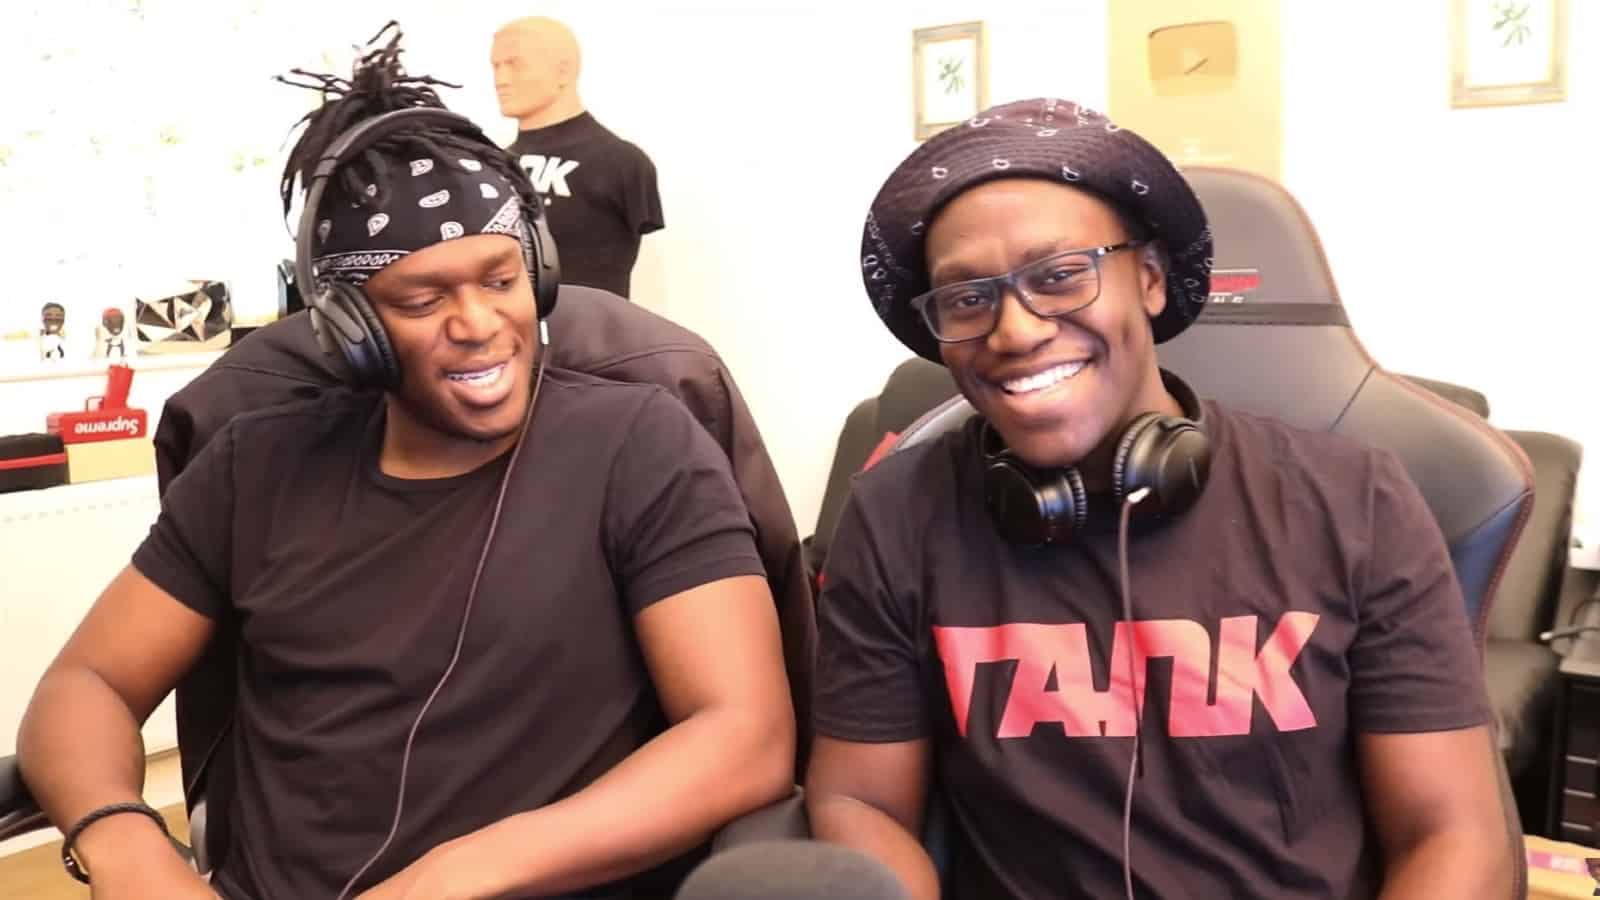 KSI and Deji reunite to settle their beef after YouTube Vs TikTok boxing event